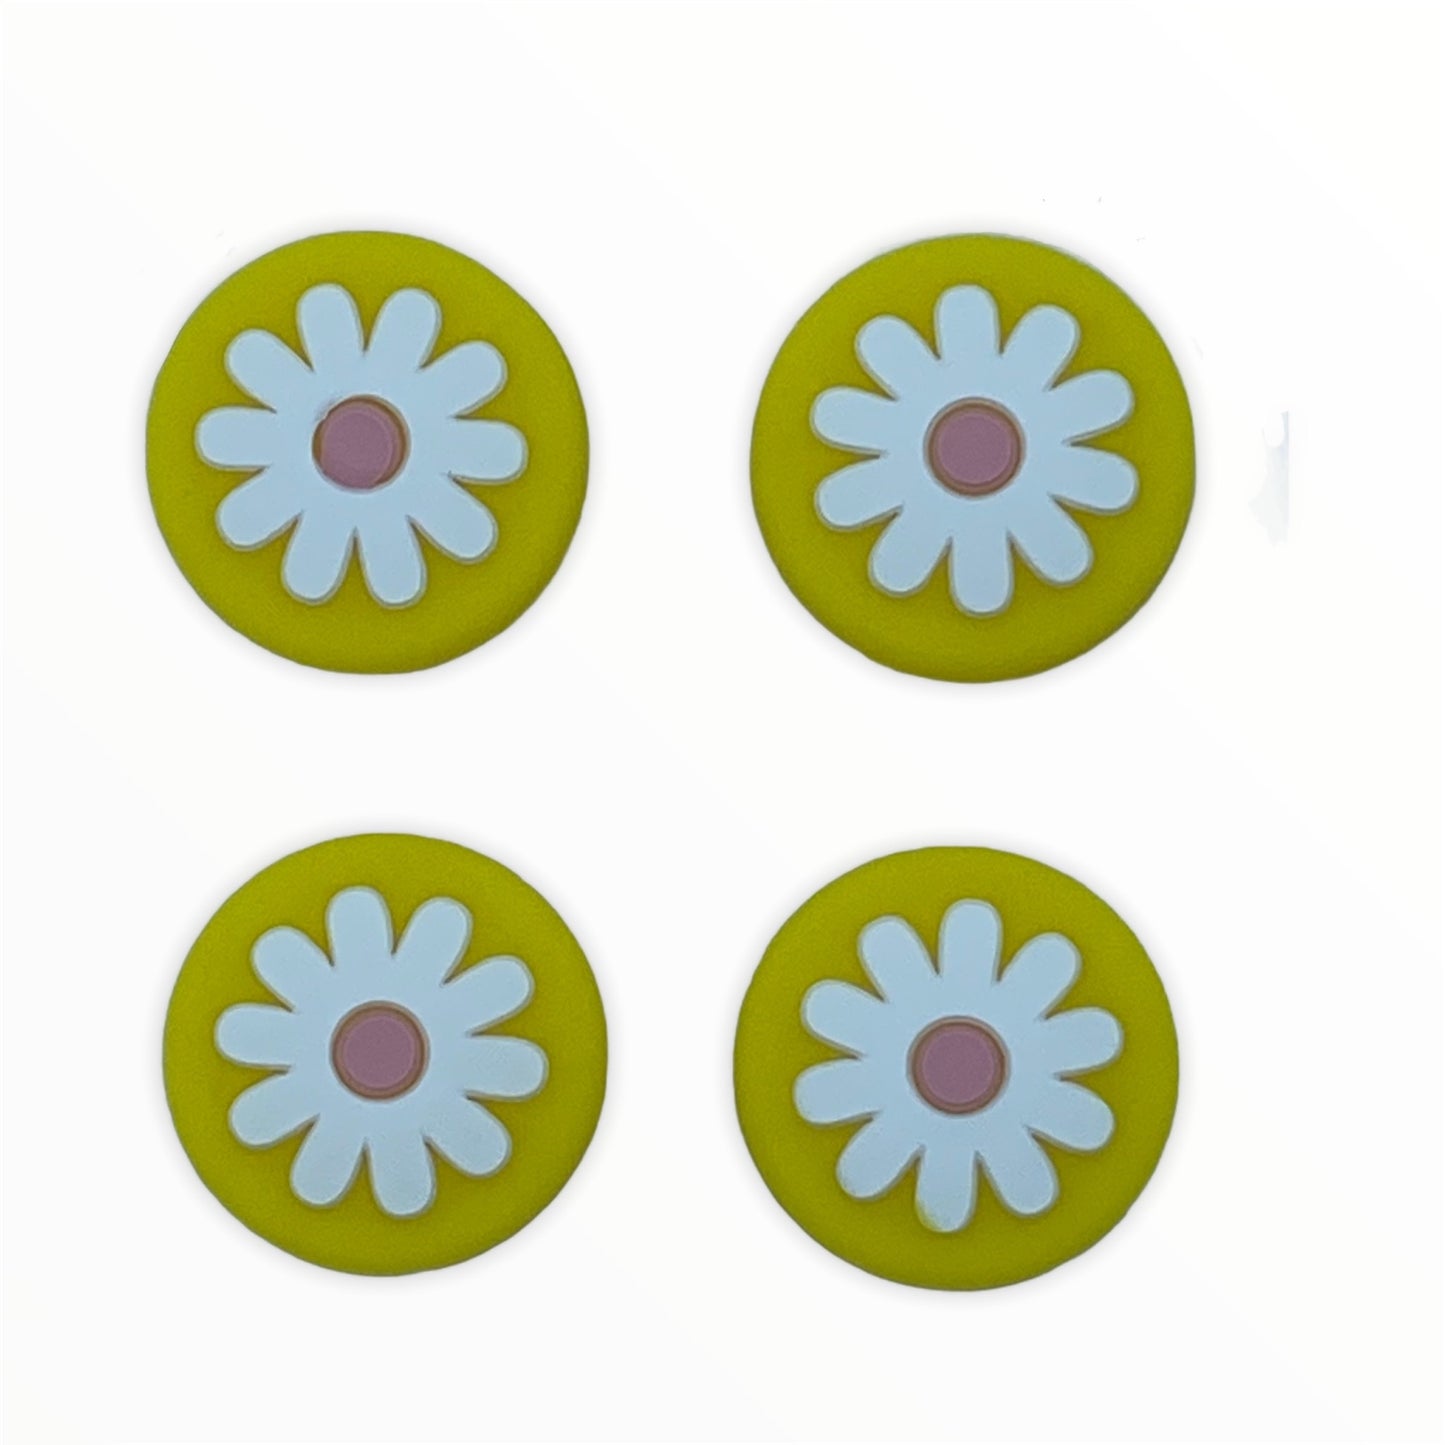 JenDore Yellow & White 4Pcs Flower Silicone Thumb Grip Caps for Nintendo Switch